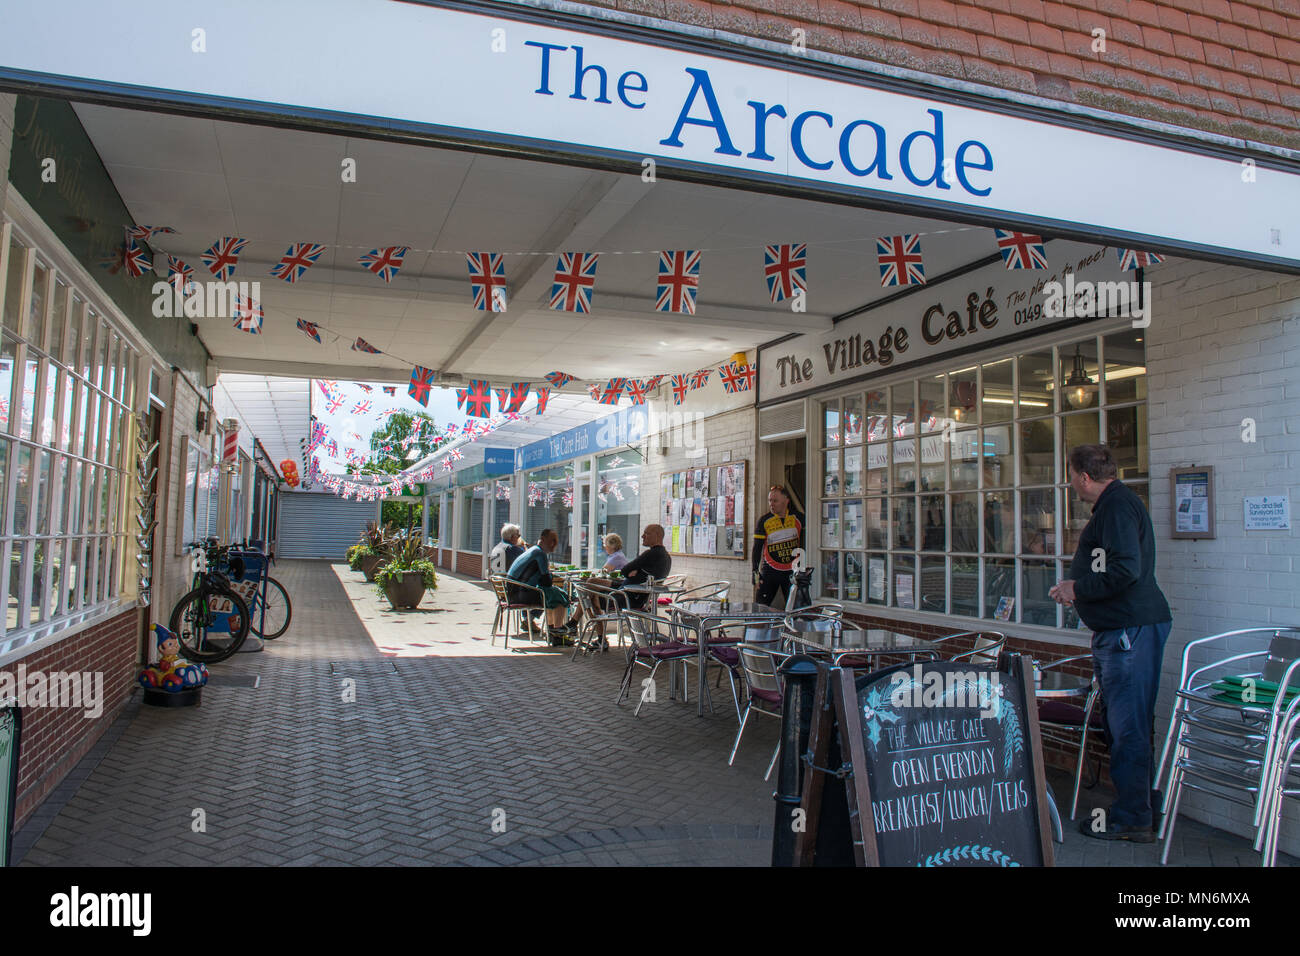 The Arcade off of the High Street in the village of Goring-on-Thames in Oxfordshire, UK, with people sitting at outside tables at a cafe Stock Photo